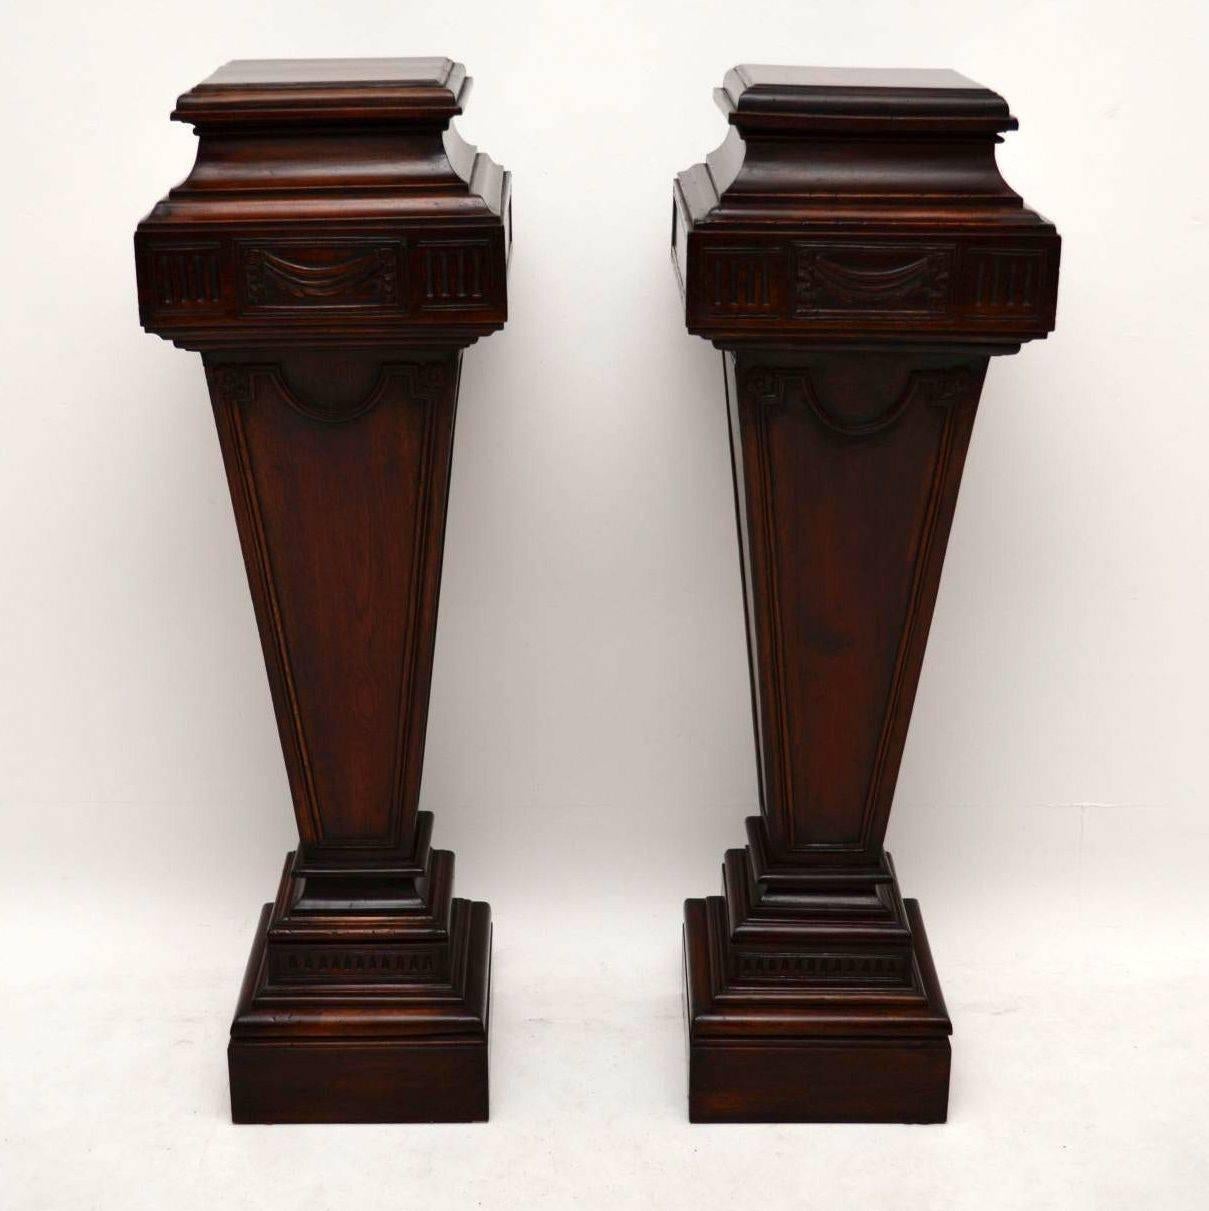 Very impressive large pair of antique mahogany pedestals. They are classical style and very imposing. Please enlarge all the images to see all the carvings and relief work. They have just been French polished, so are in good condition and I would